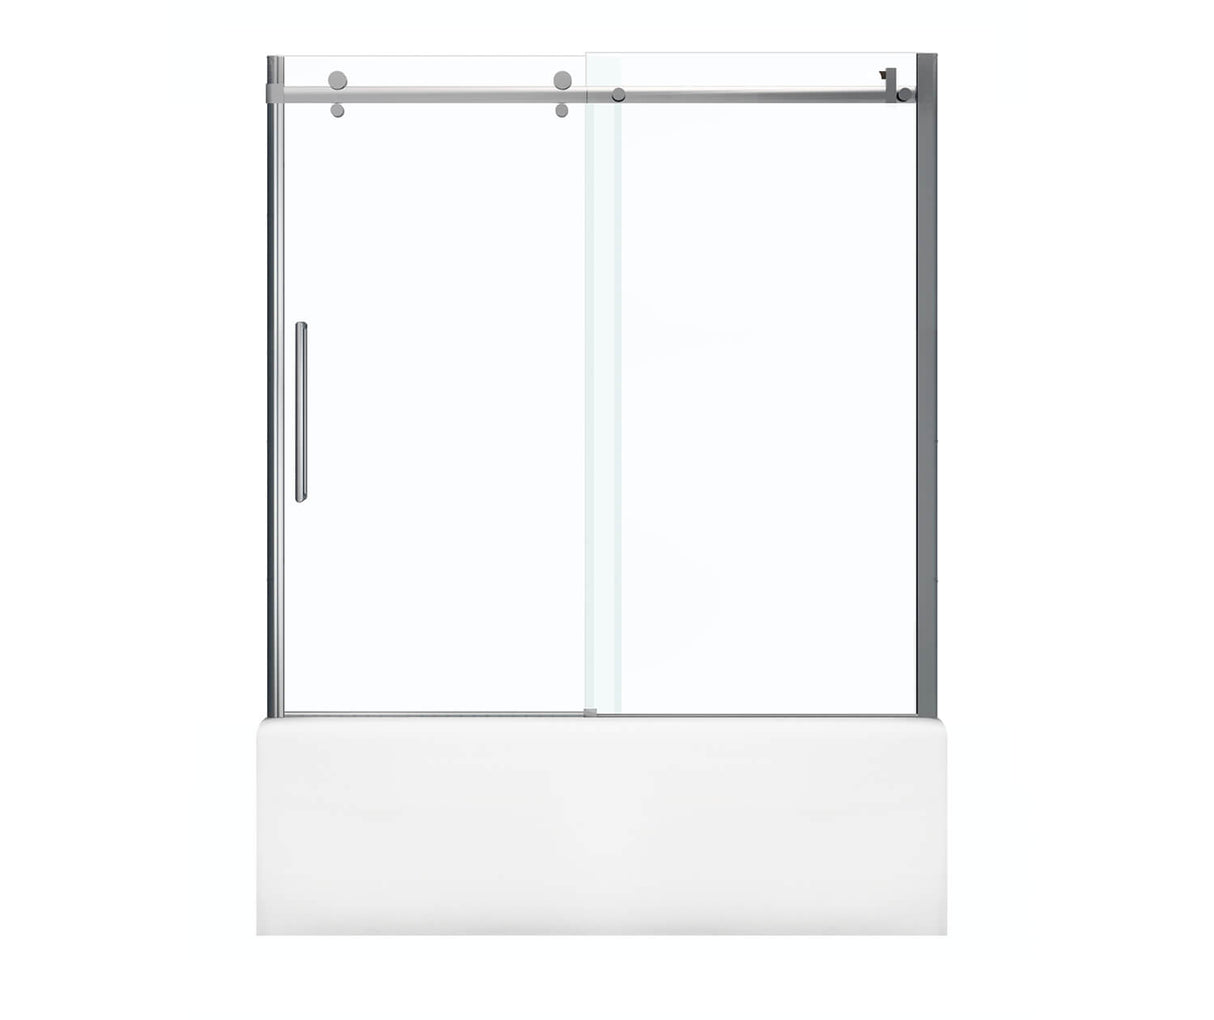 MAAX 139398-900-084-000 Halo 56 ½-59 x 59 in. 8 mm Sliding Tub Door for Alcove Installation with Clear glass in Chrome